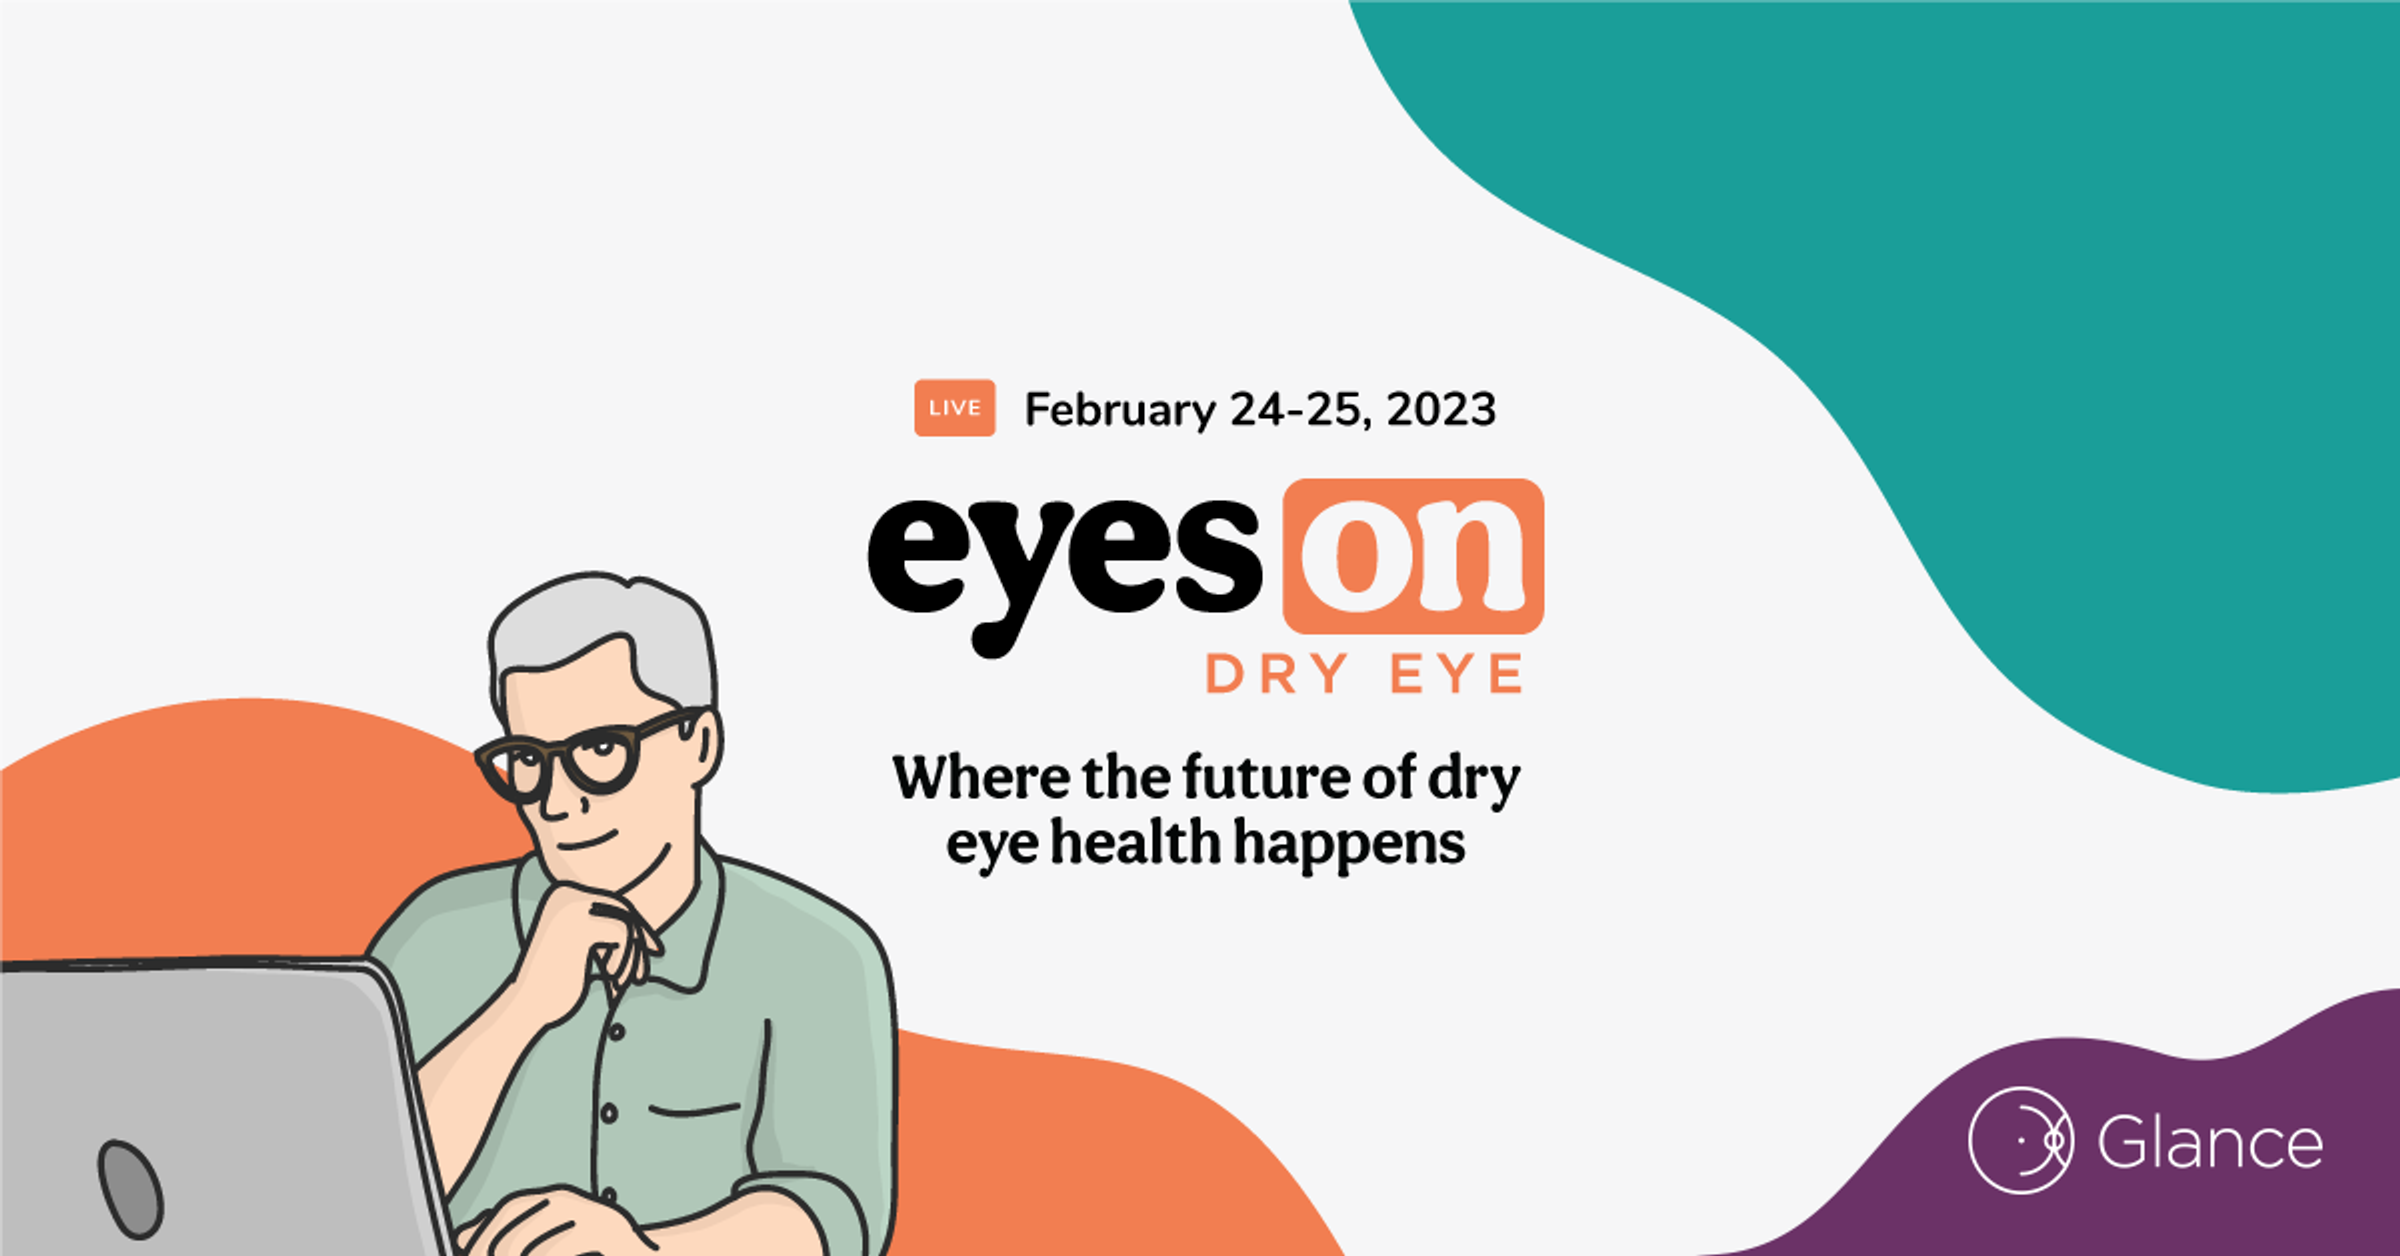 Eyes On Dry Eye exceeds industry expectations 